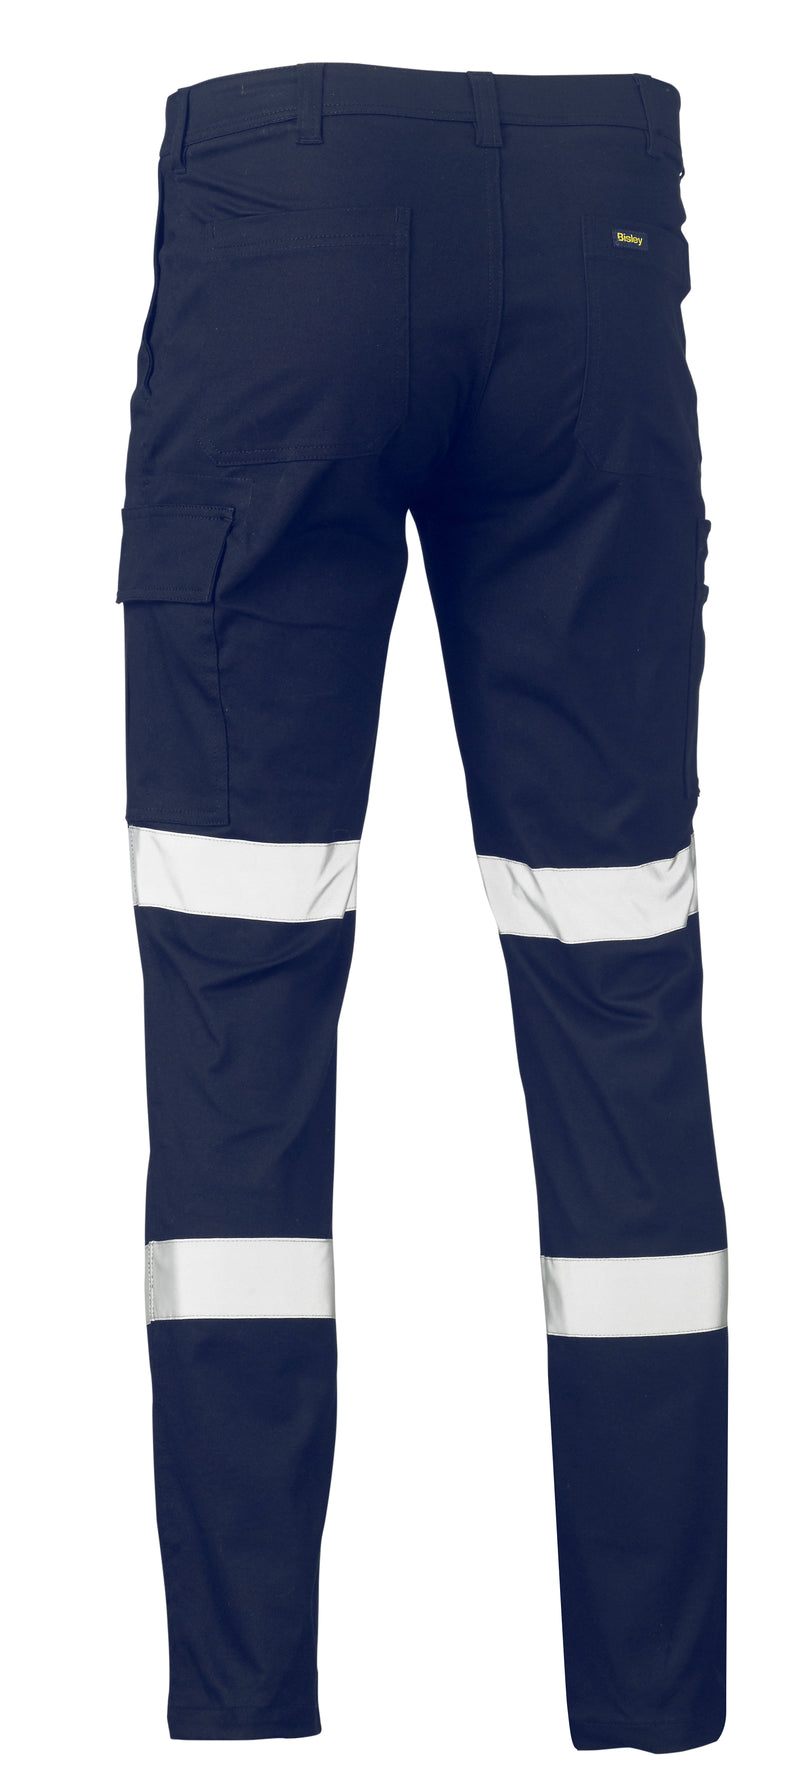 Load image into Gallery viewer, Wholesale BPC6008T Bisley Taped Biomotion Stretch Cotton Drill Cargo Pants - Stout Printed or Blank
